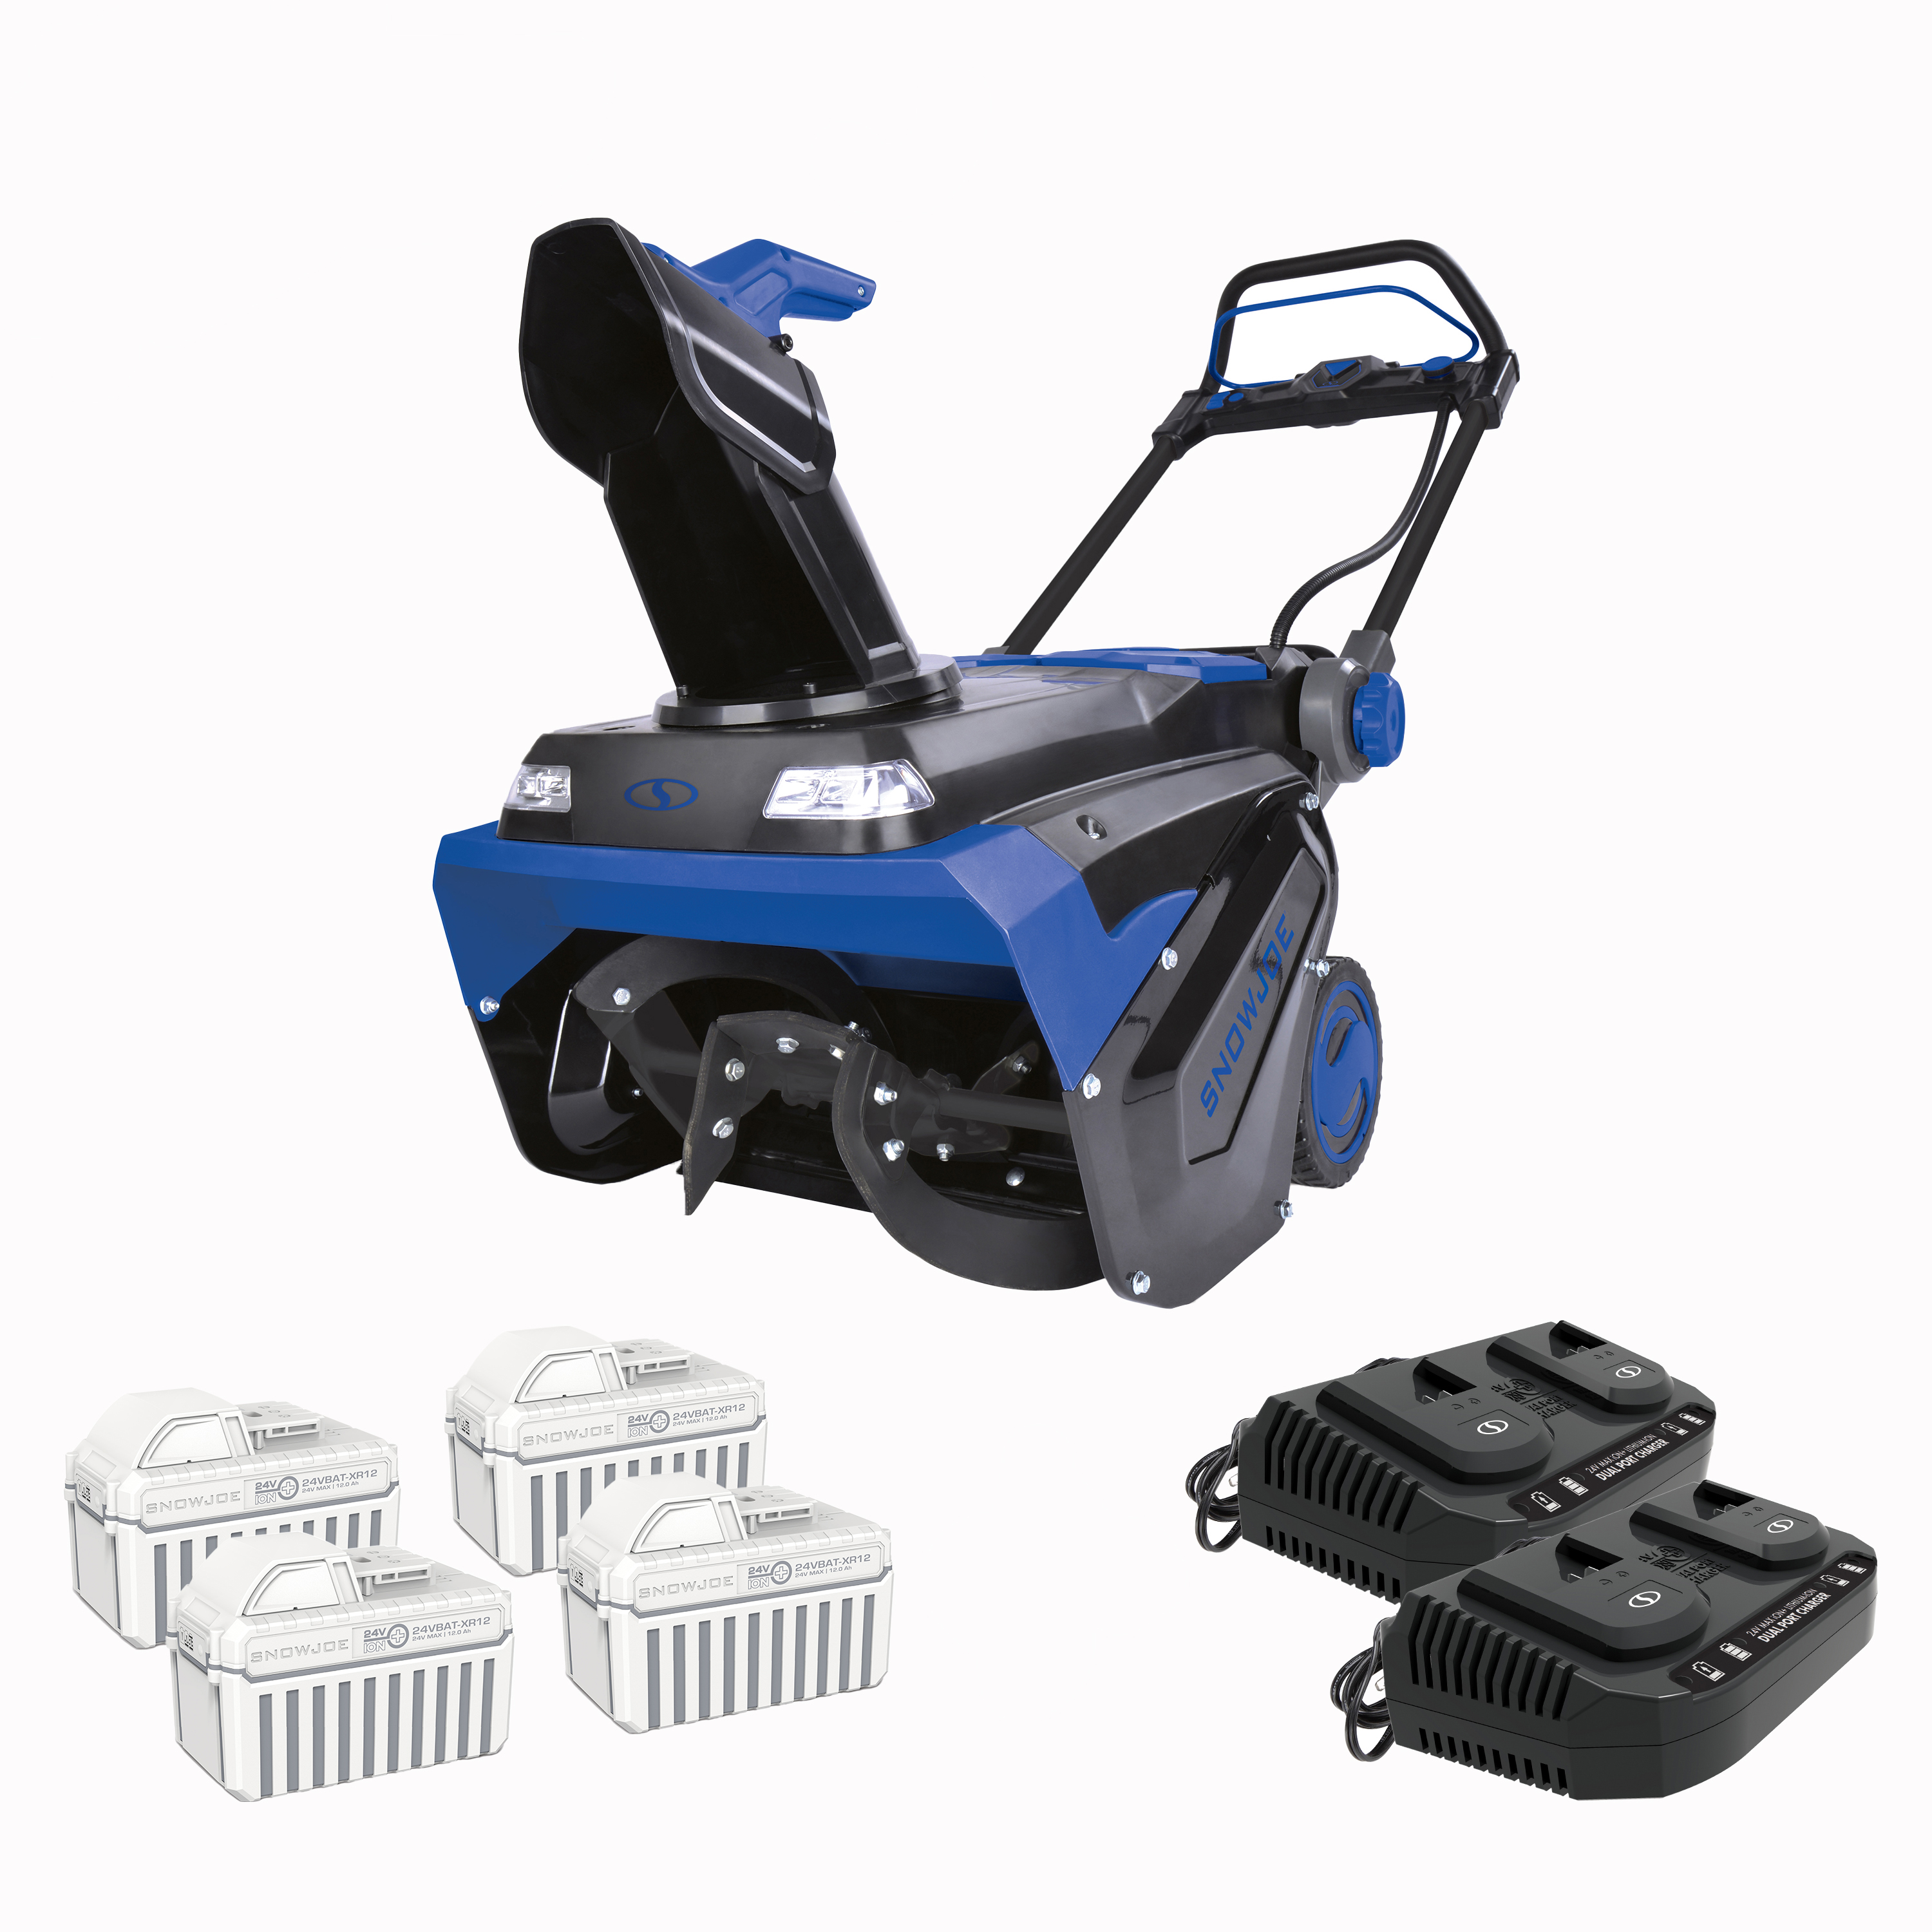 Snow Joe 96V 21-inch Brushless Single-Stage Cordless Snow Blower, 4 x 12.0-Ah Batteries & 2 x Chargers - image 1 of 7